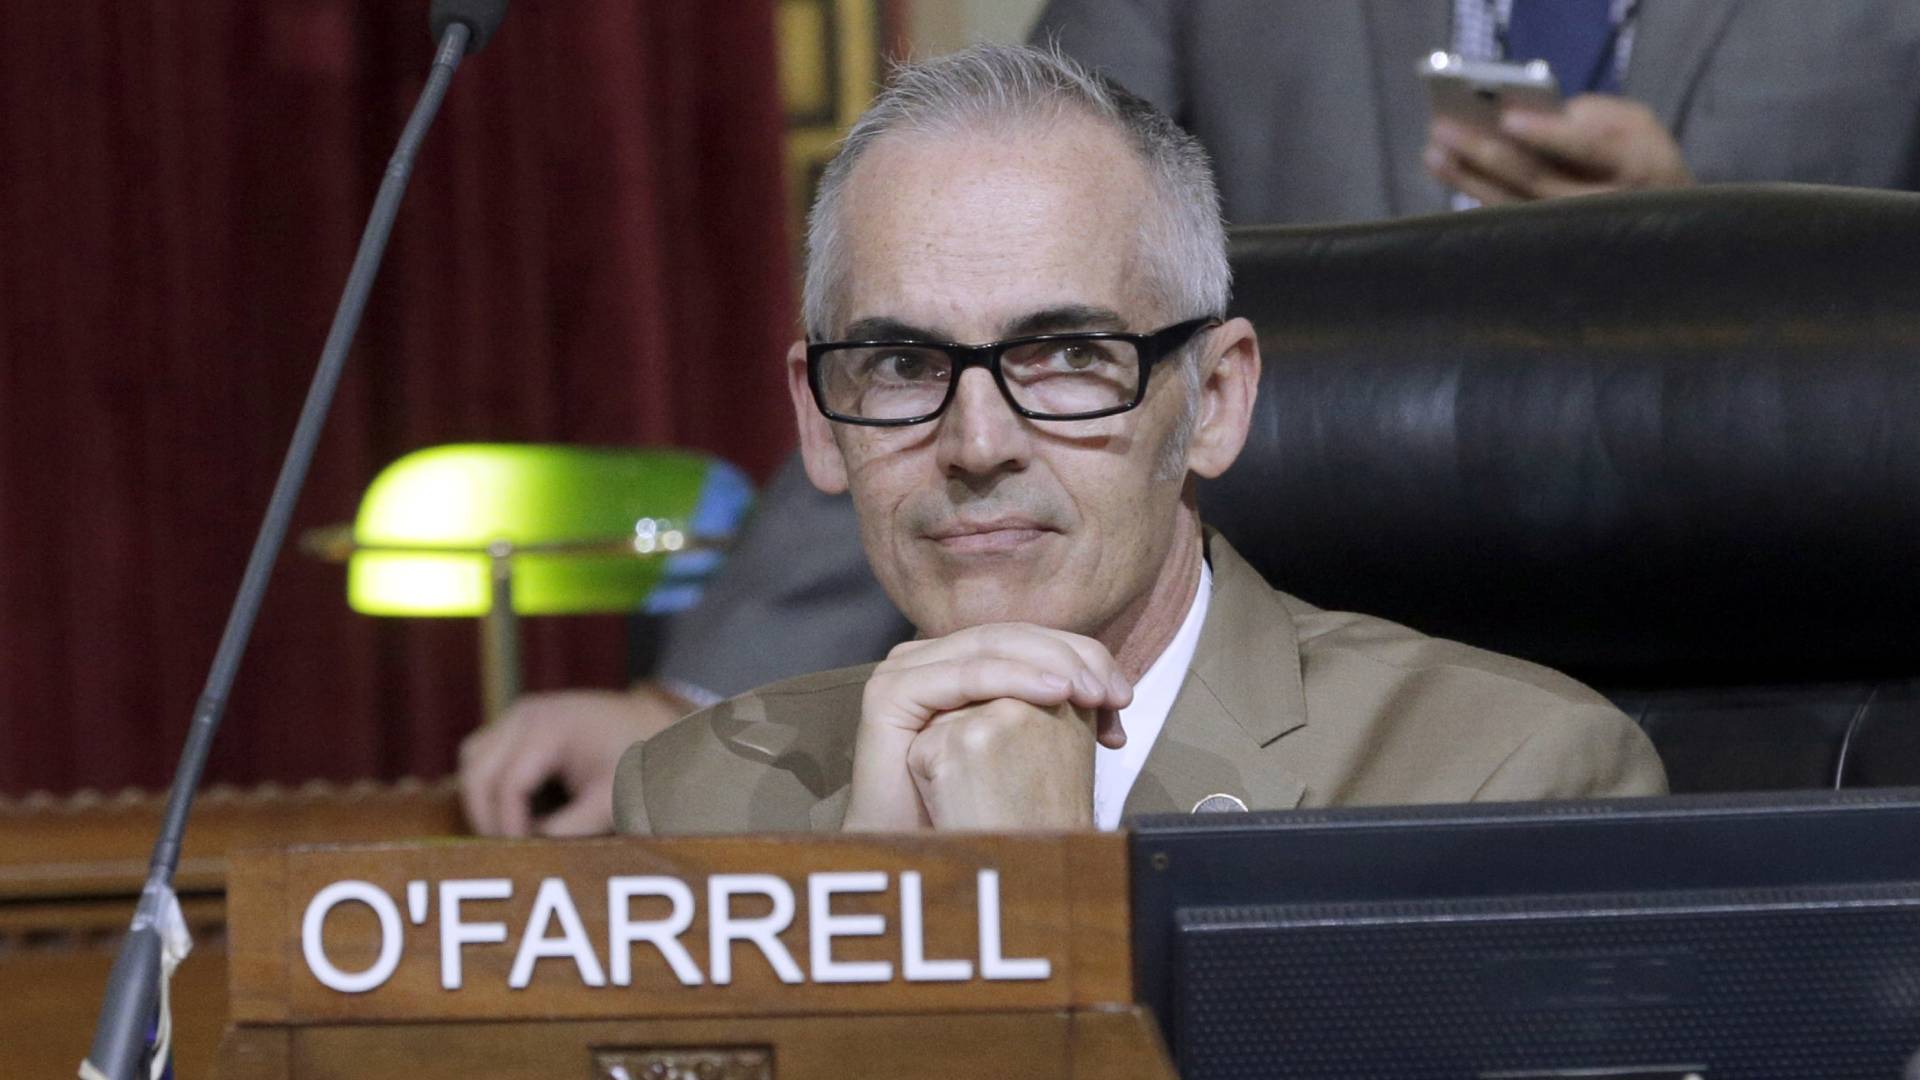 L.A. City Councilman Mitch O’Farrell is seen in Council Chambers Nov. 18, 2015. O'Farrell and Council President Nury Martinez introduced a proposal last week to use $10 million in federal CARES Act funding to protect renters from eviction amid the pandemic. (AP Photo/Nick Ut)